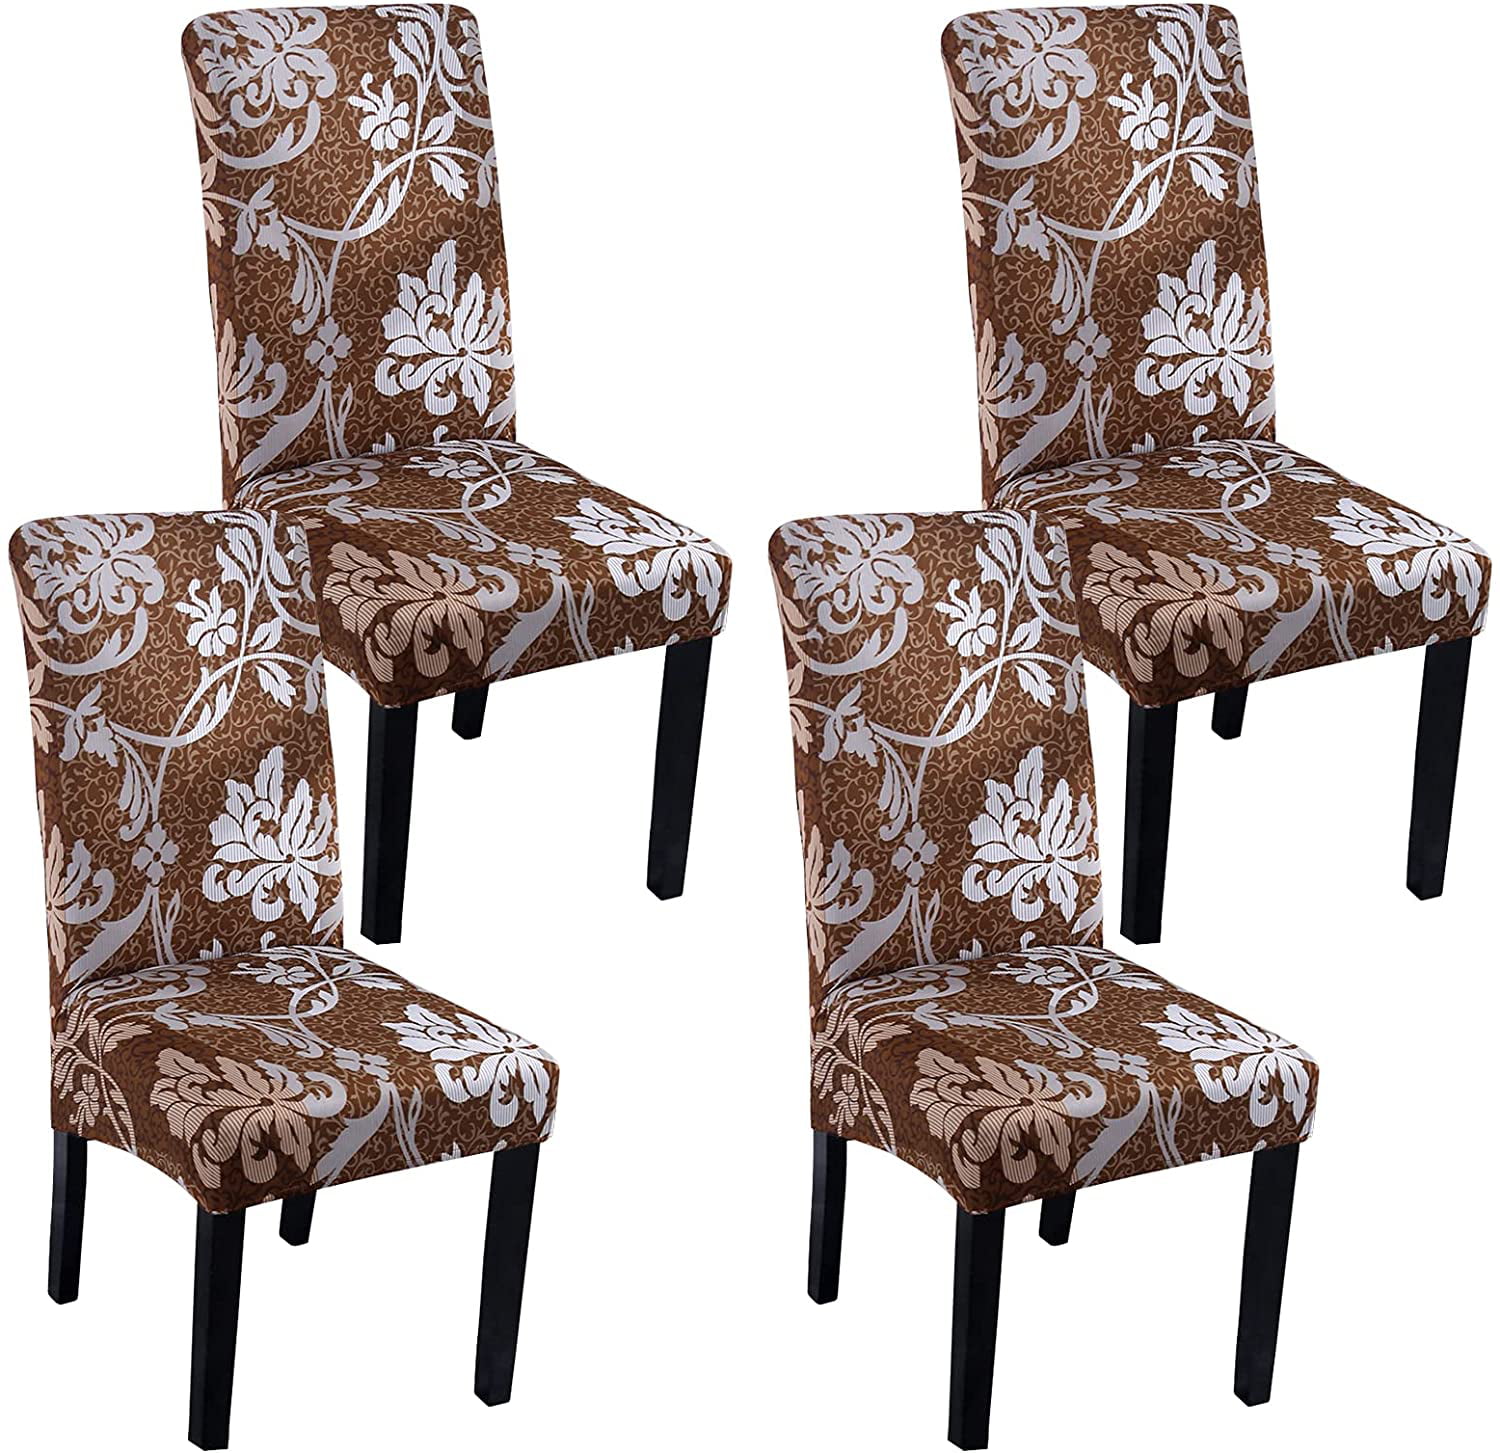 4PCS Dining Chair Seat Covers Slip Stretch Wedding Banquet Party Removable Home 